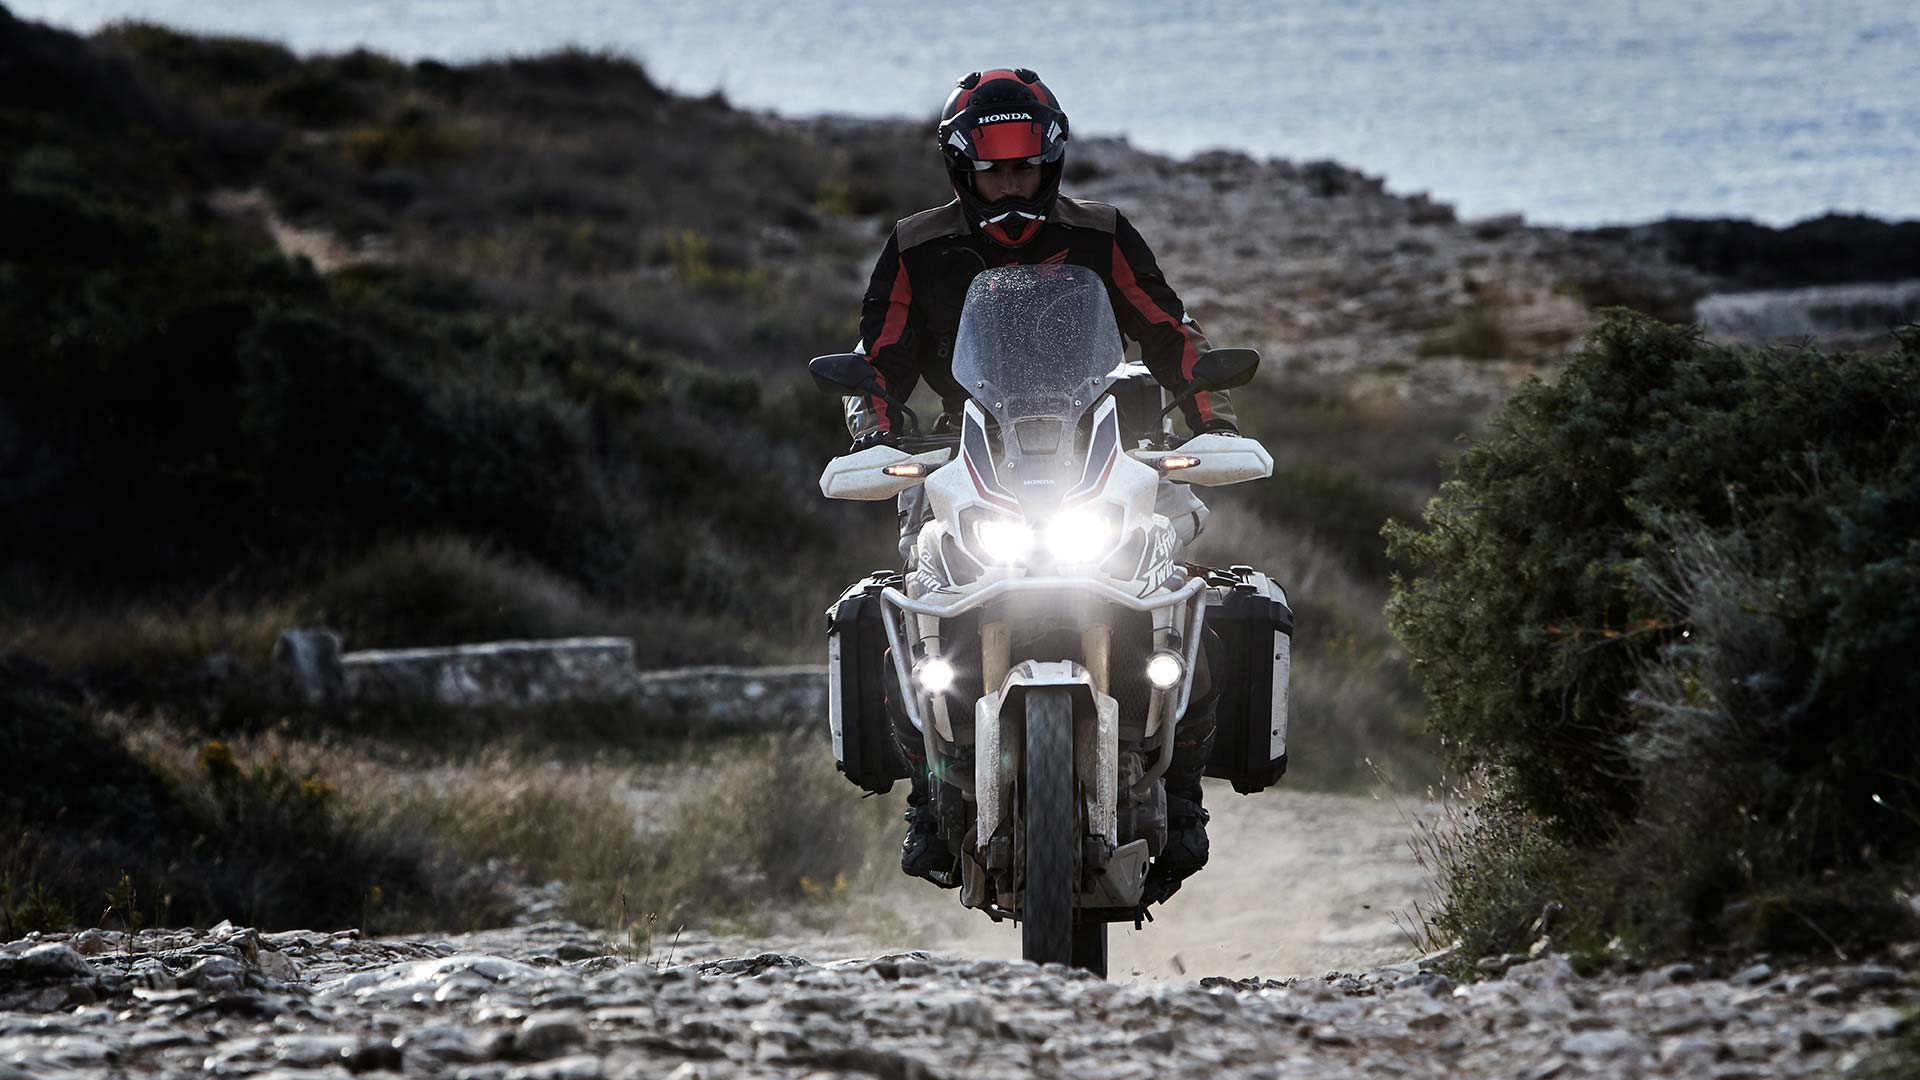 Honda Africa Twin CRF1000L Review